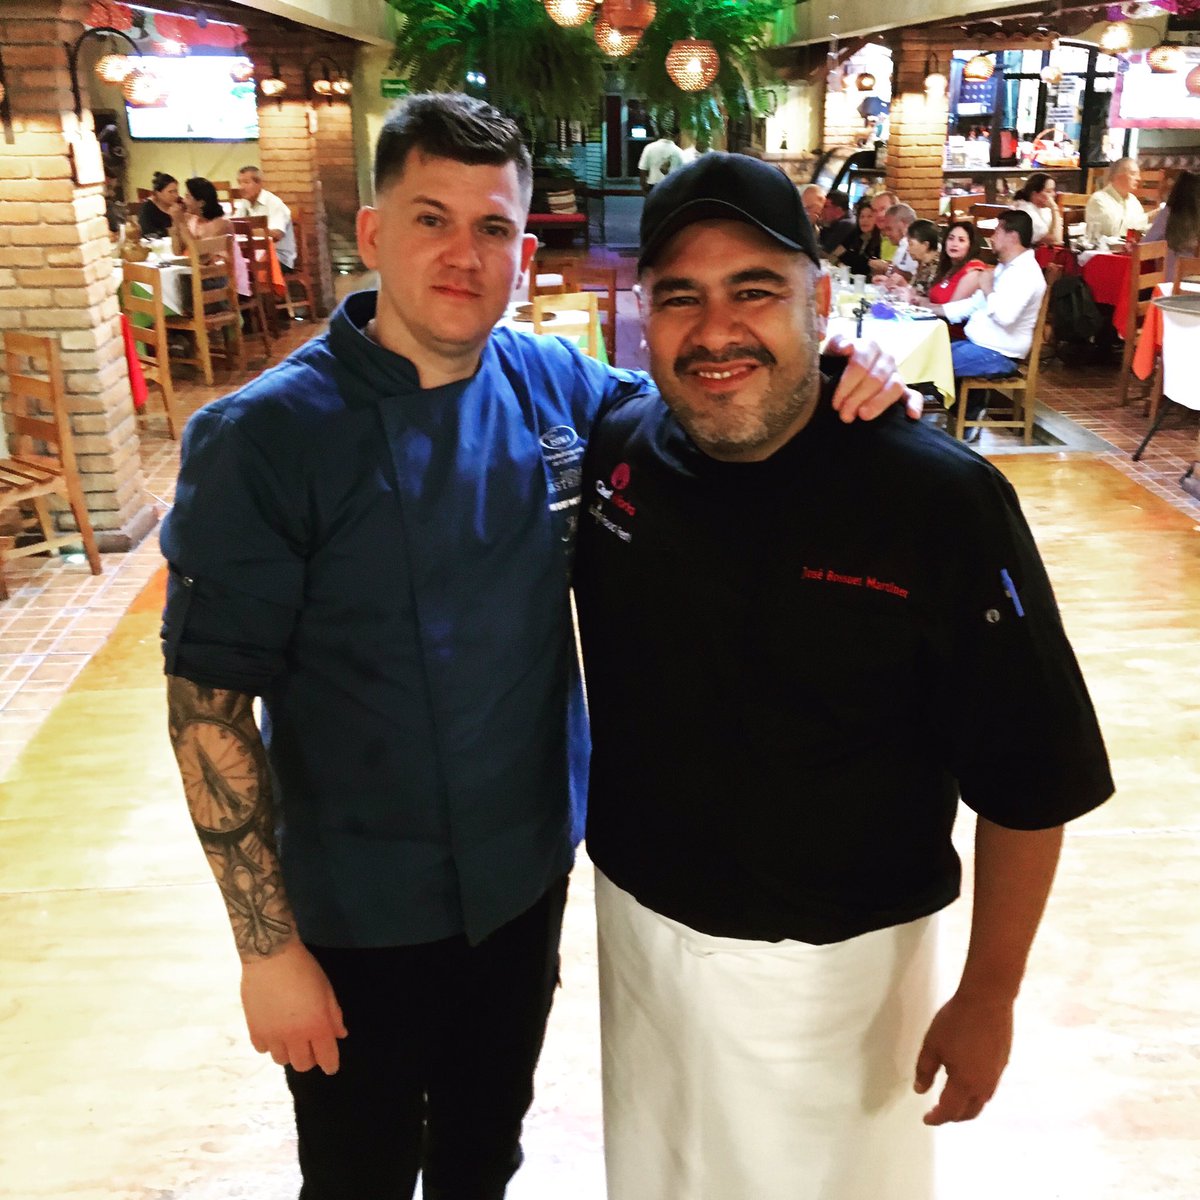 Big pleasure meeting you @chefgraham1 tonight in @las_pichanchas #chiapascuisine during dinner, we hope you enjoy our culinary culture & traditional folklore! Never forget #salepumpo #tuxtlagutierrez #chiapas #michelinstarred #chefbossuet #culinaryfriendship @isimaoficial